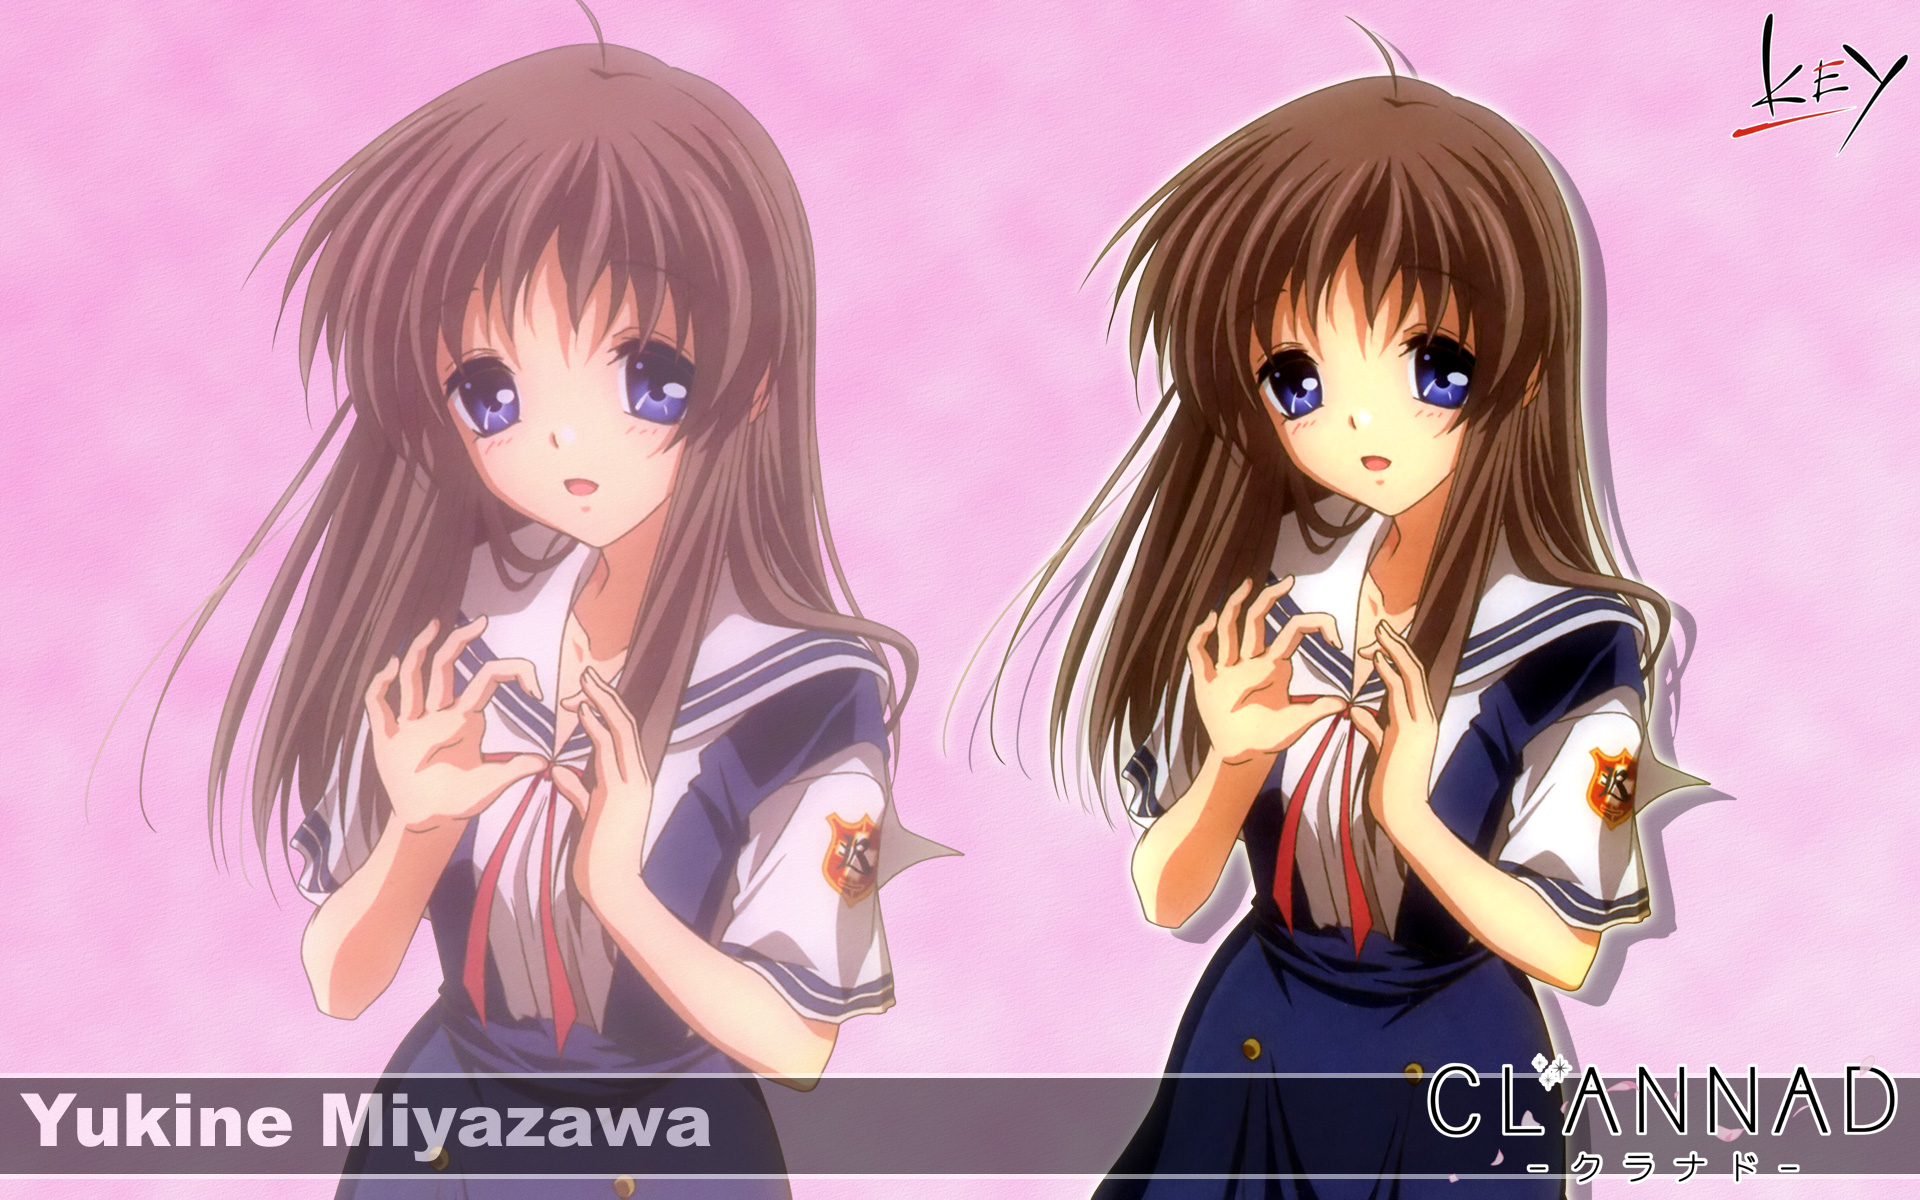 Yukine Miyazawa from the anime Clannad appearing in a desktop wallpaper.